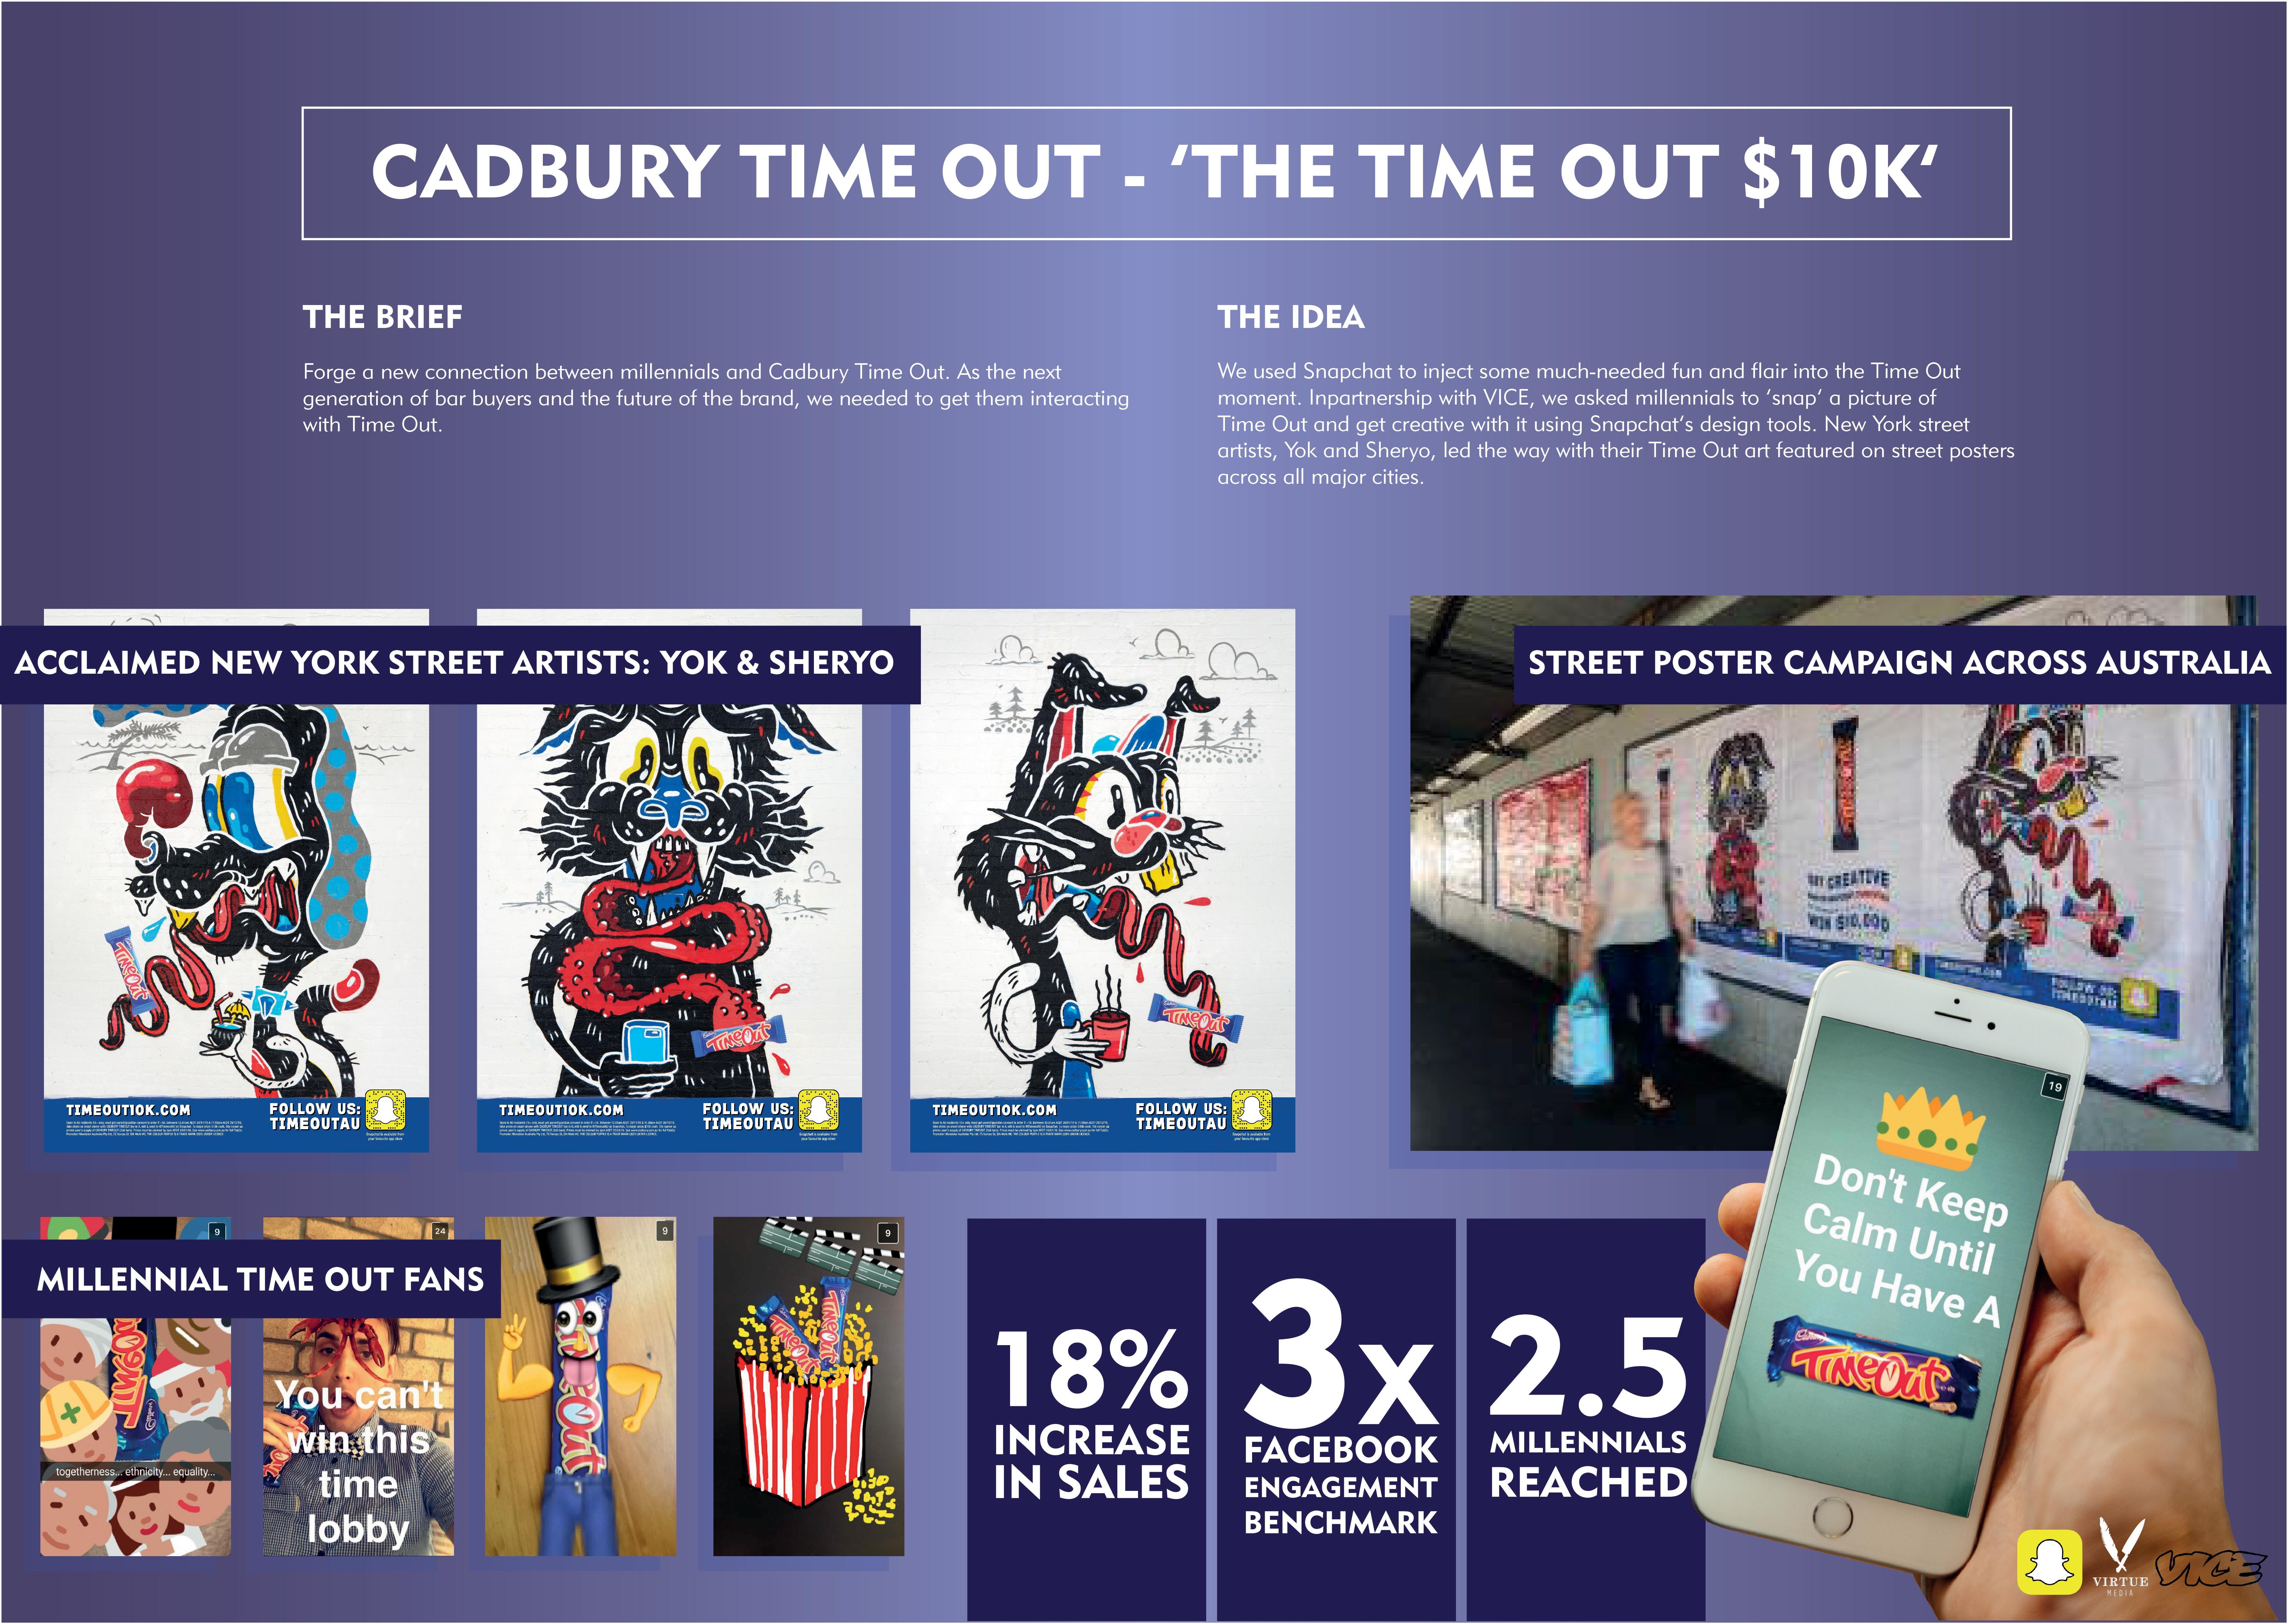 Cadbury Time Out - 'The Time Out $10k'